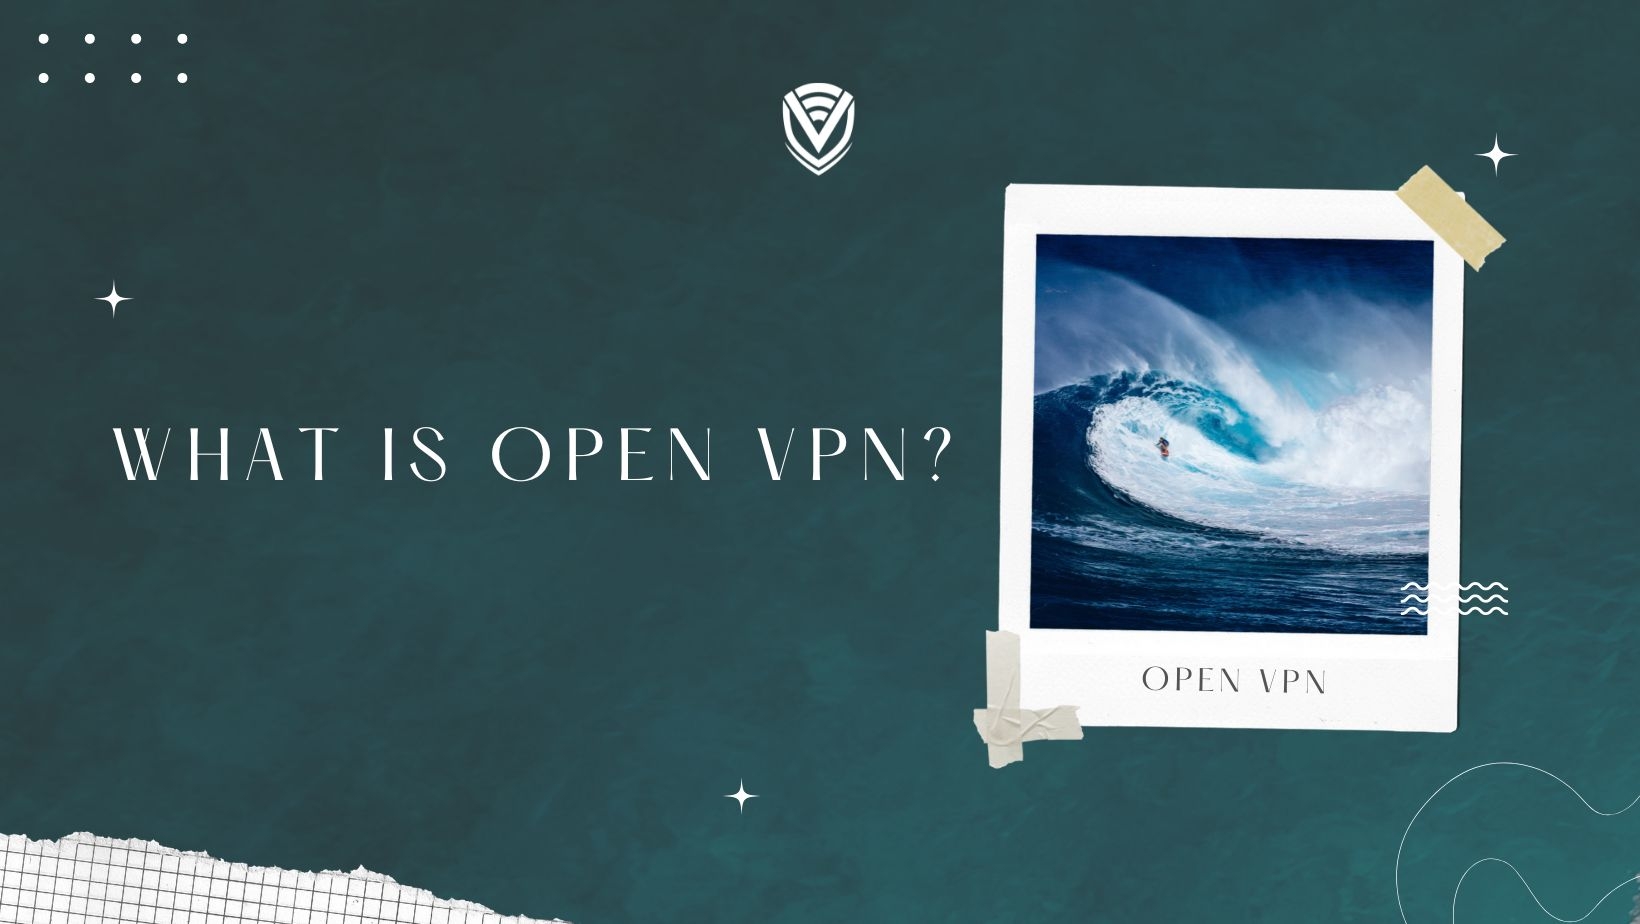 OpenVPN, Learn what and how it does it